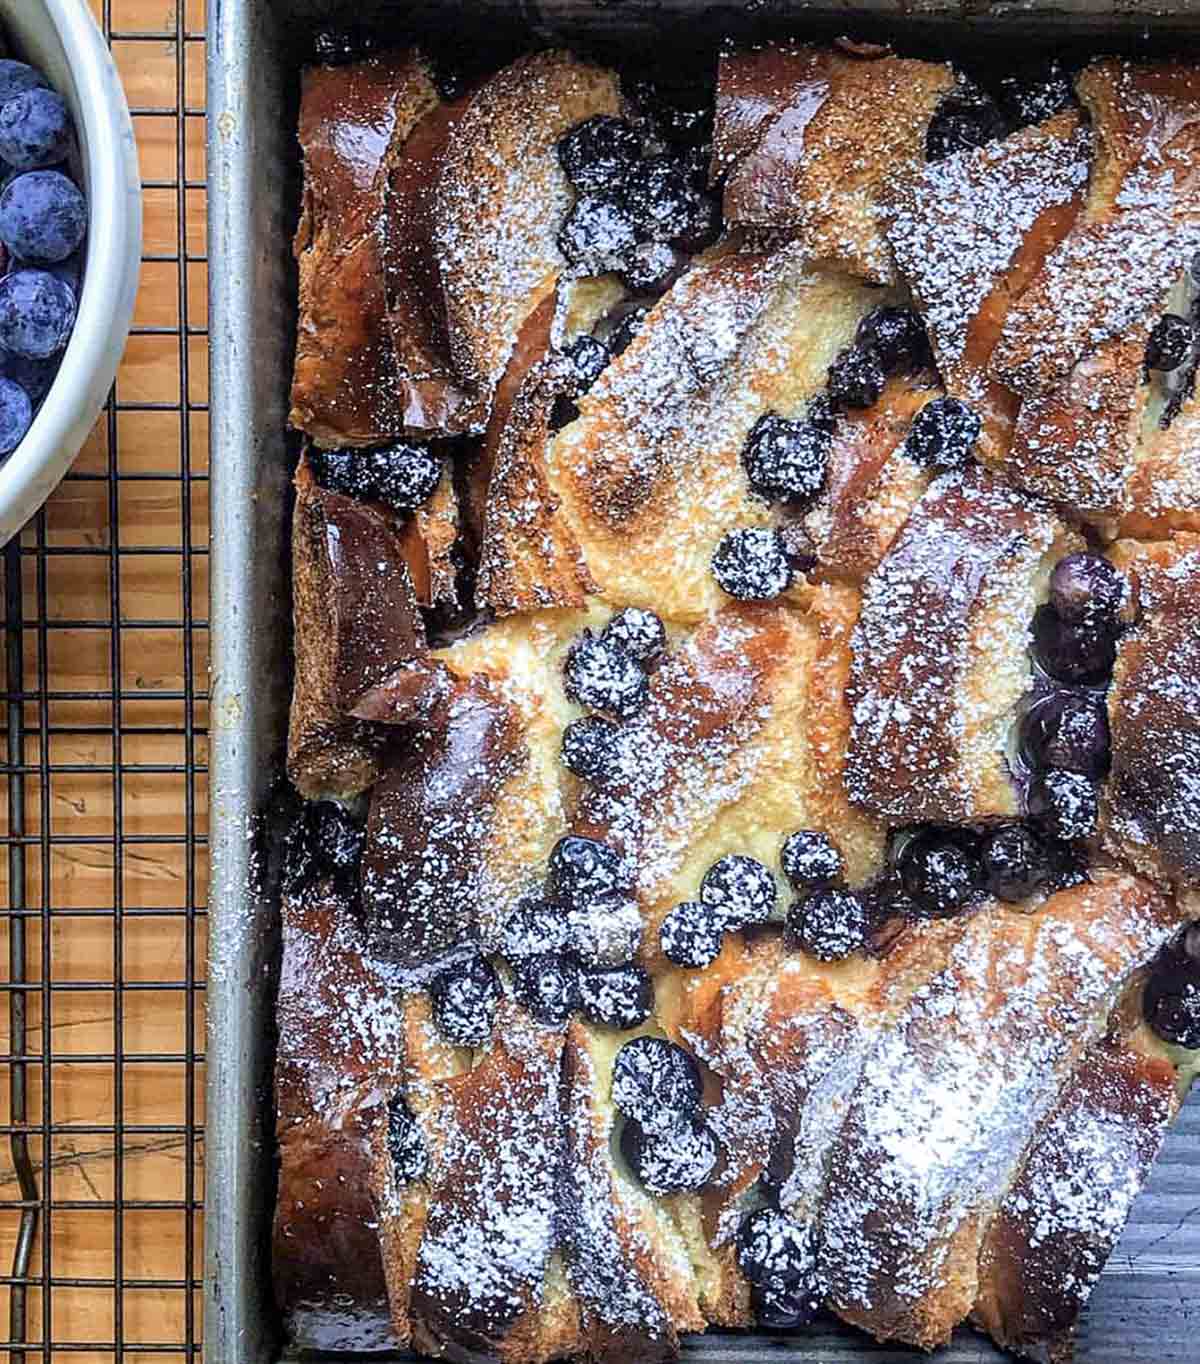 A pan of blueberry brioche French toast casserole on a wire rack with a bowl of blueberries next to it.